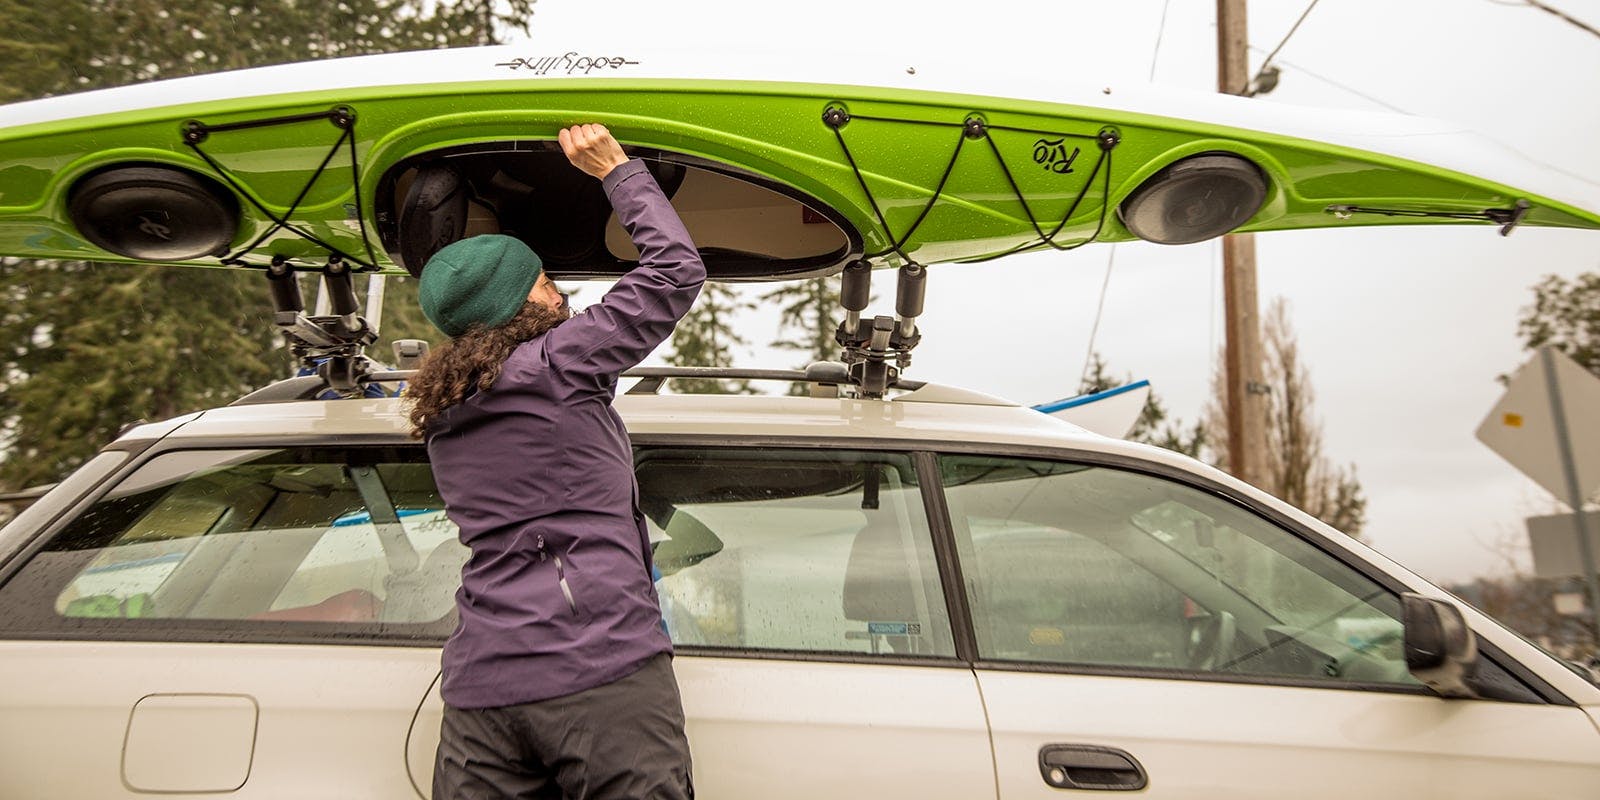 Buying Guide For Kayak Roof Rack For Cars Without Rails